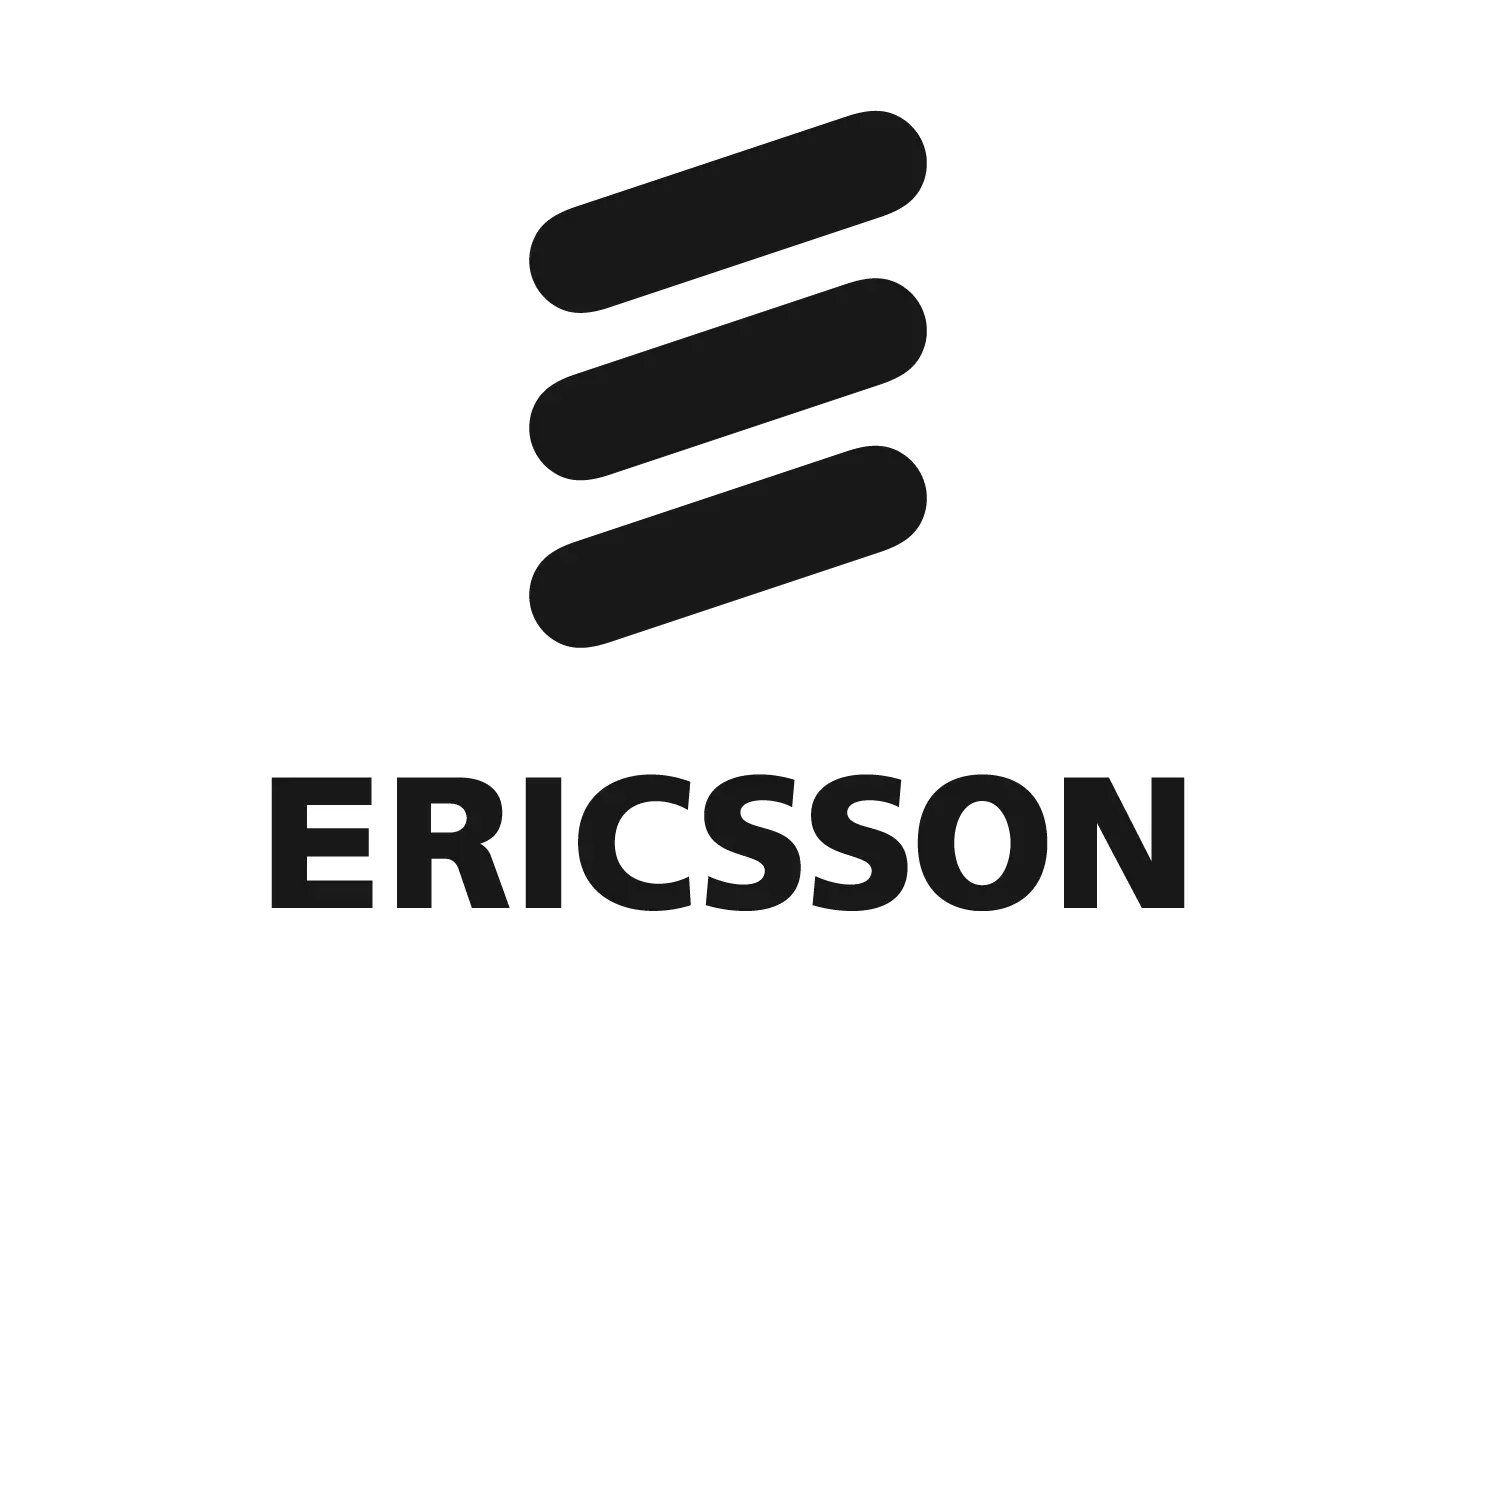 Ericsson named a Leader in the 2022 Gartner® Magic Quadrant™ for 5G Network Infrastructure for Communications Service Providers report-thumnail